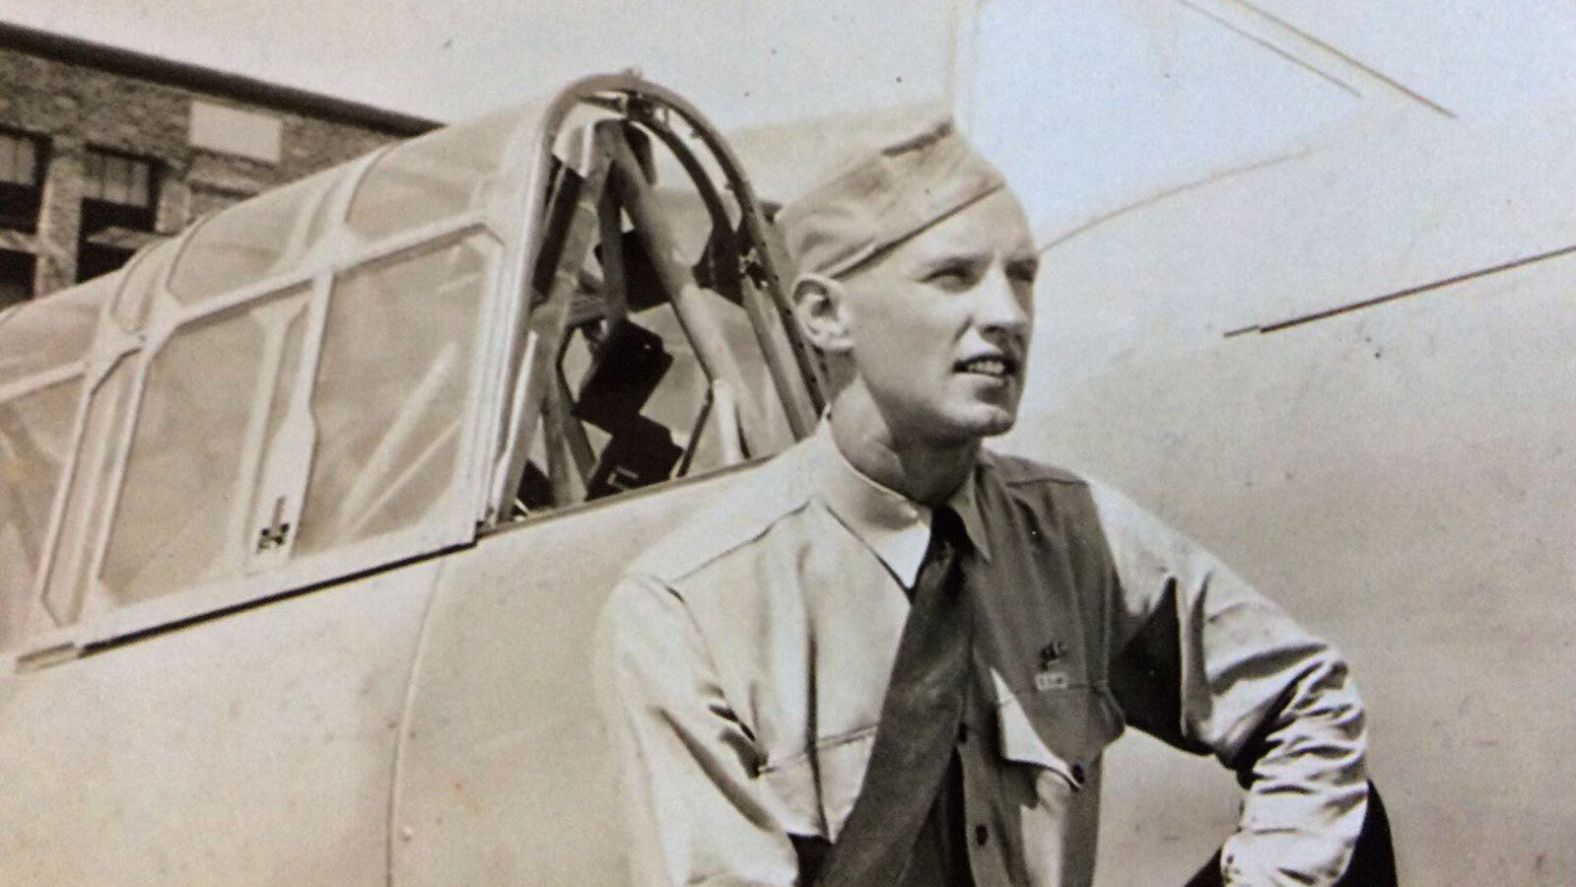 <a href="index.php?page=&url=https%3A%2F%2Fwww.cnn.com%2F2022%2F08%2F30%2Fus%2Fwwii-fighter-pilot-dean-laird-obit%2Findex.html" target="_blank">Dean "Diz" Laird,</a> the only known US Navy ace to shoot down both German and Japanese planes during World War II, died on August 10, his daughter said. He was 101.